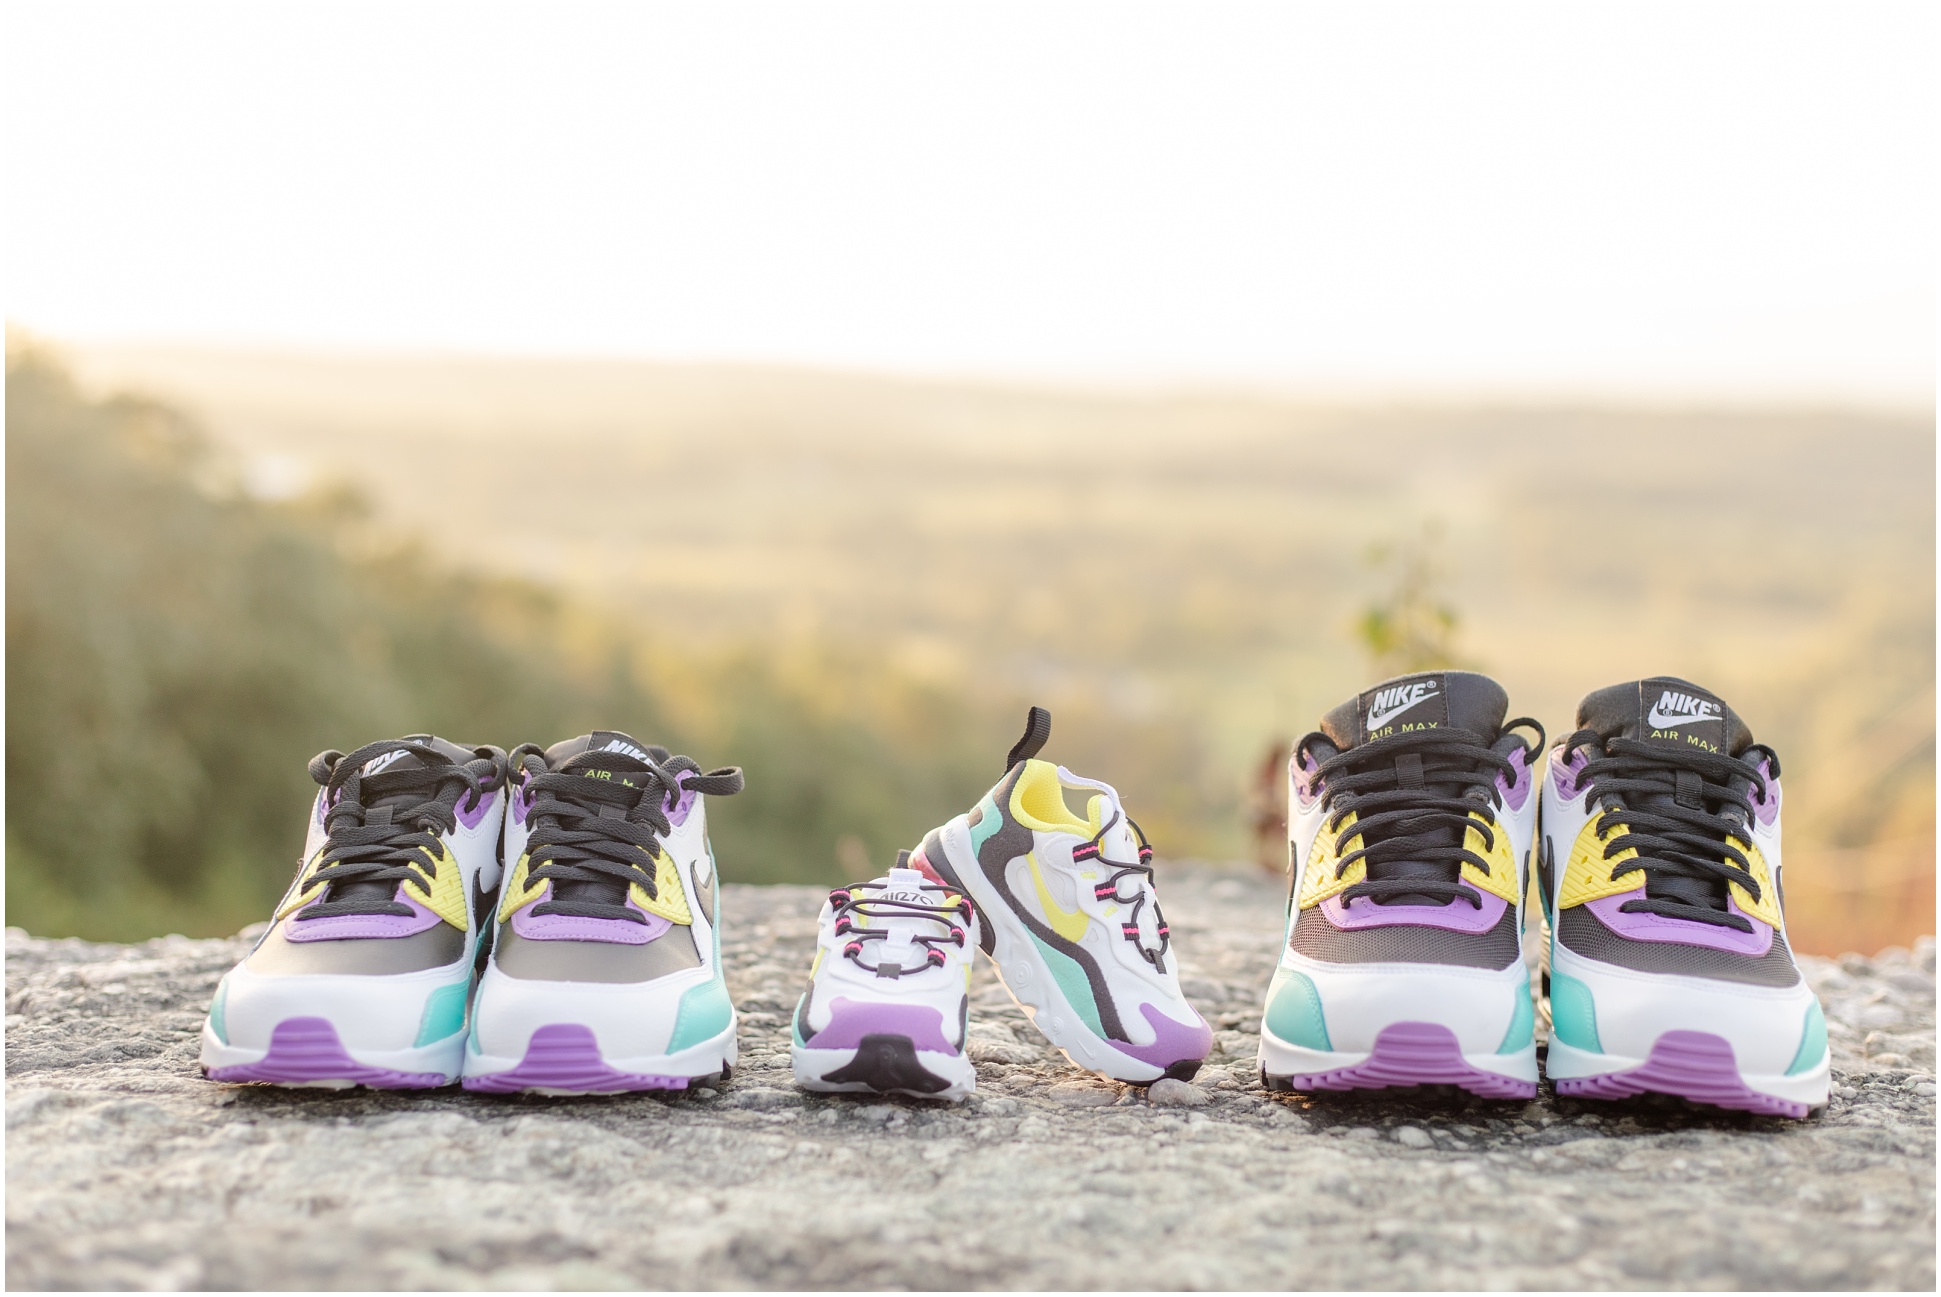 Three pairs of Purple, Teal, and Yellow, Nike Air Max